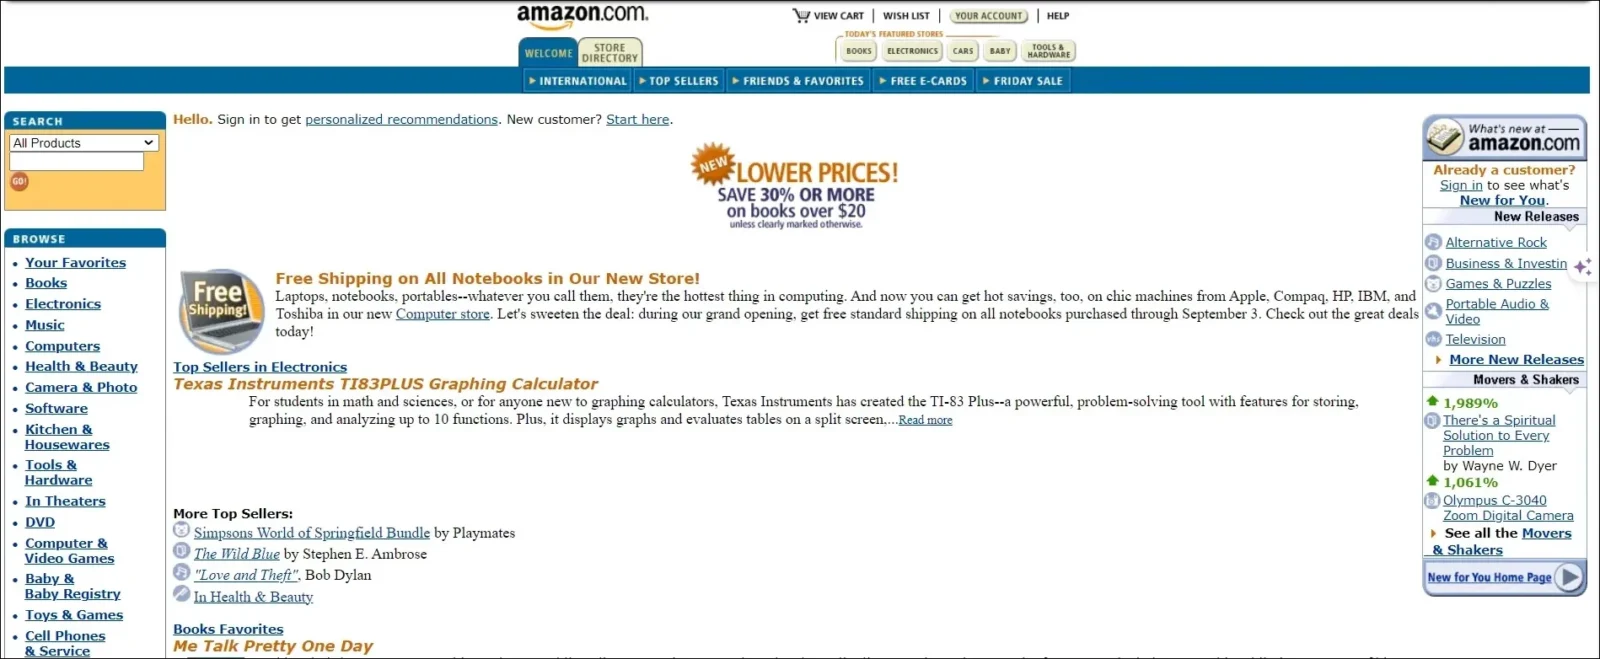 homepage of amazon in 2001